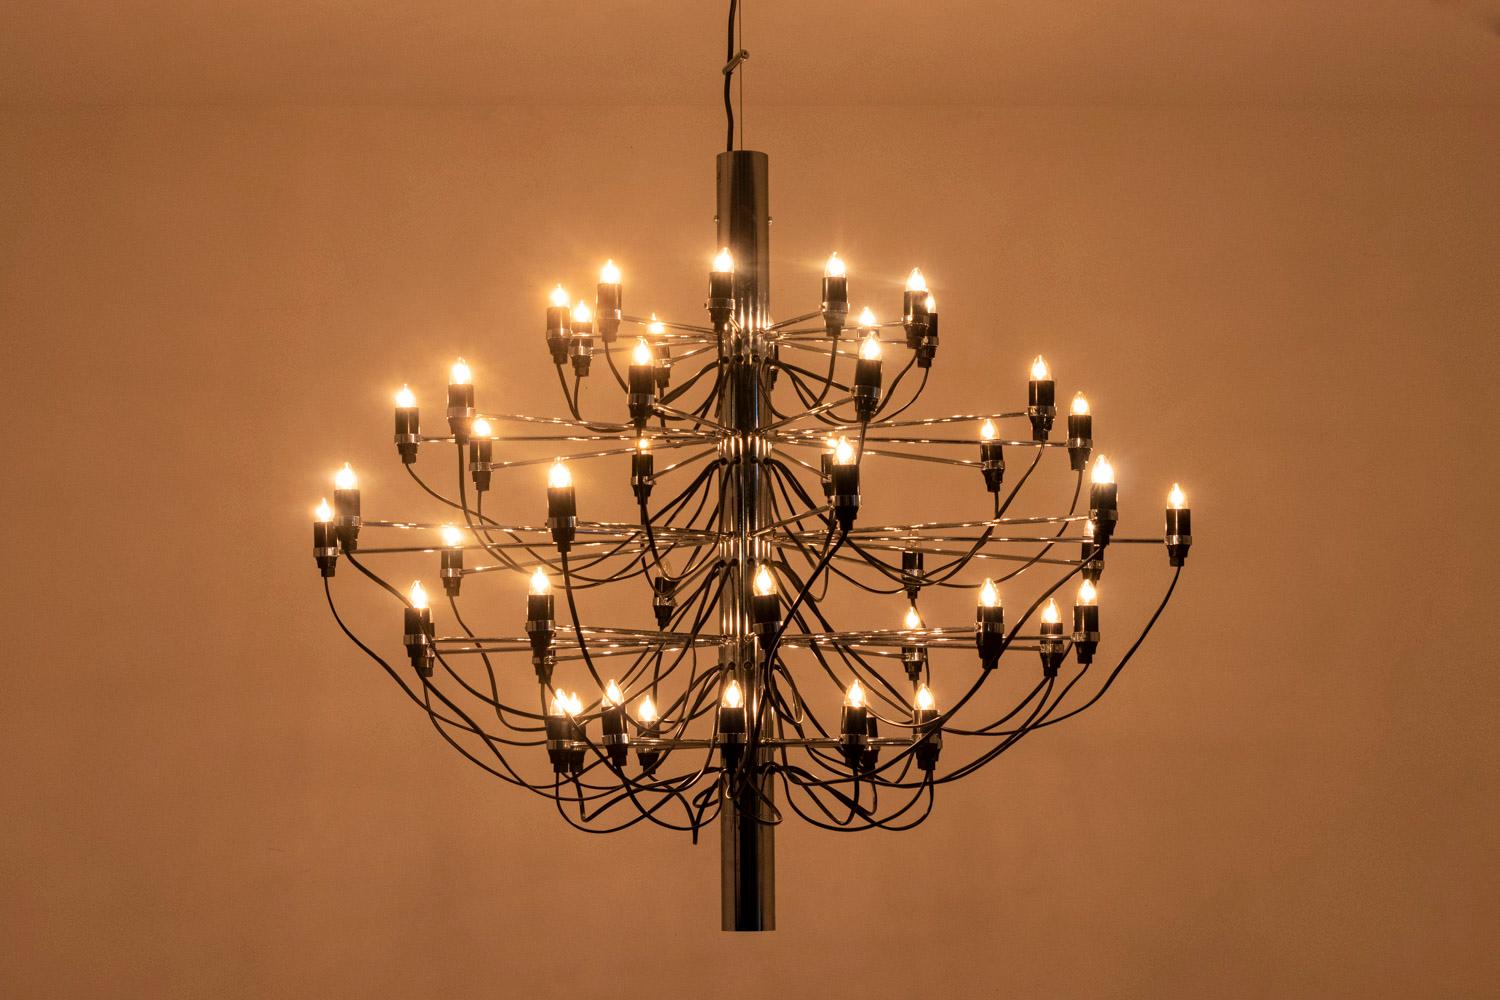 Gino Sarfatti, edited by.
Flos, edited by.

Chandelier with fifty lights arranged in five rows in chromed steel. Structure resting on a rectilinear barrel in black chromed metal. The douiles and the thread become a decoration in